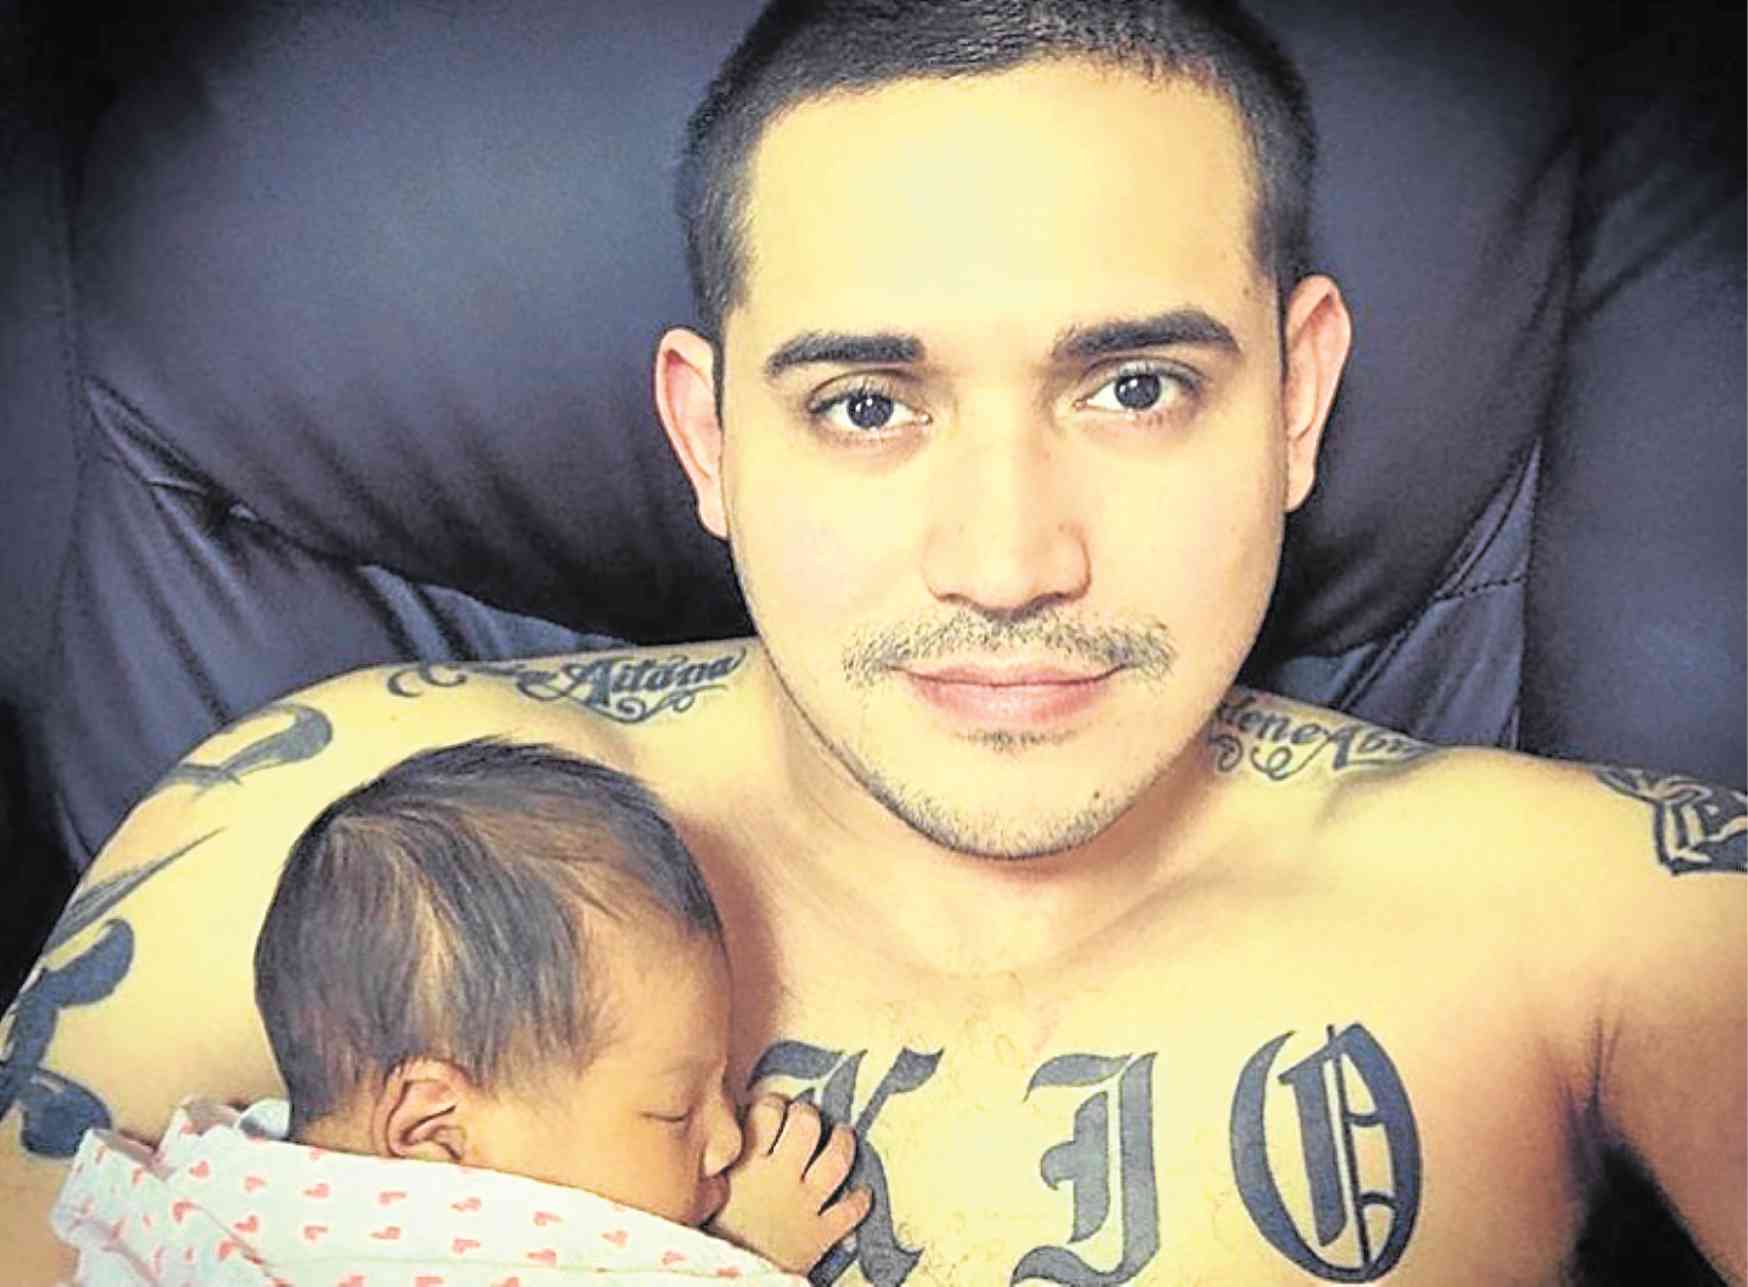 Paolo Contis, a hands-on dad to baby Summer  